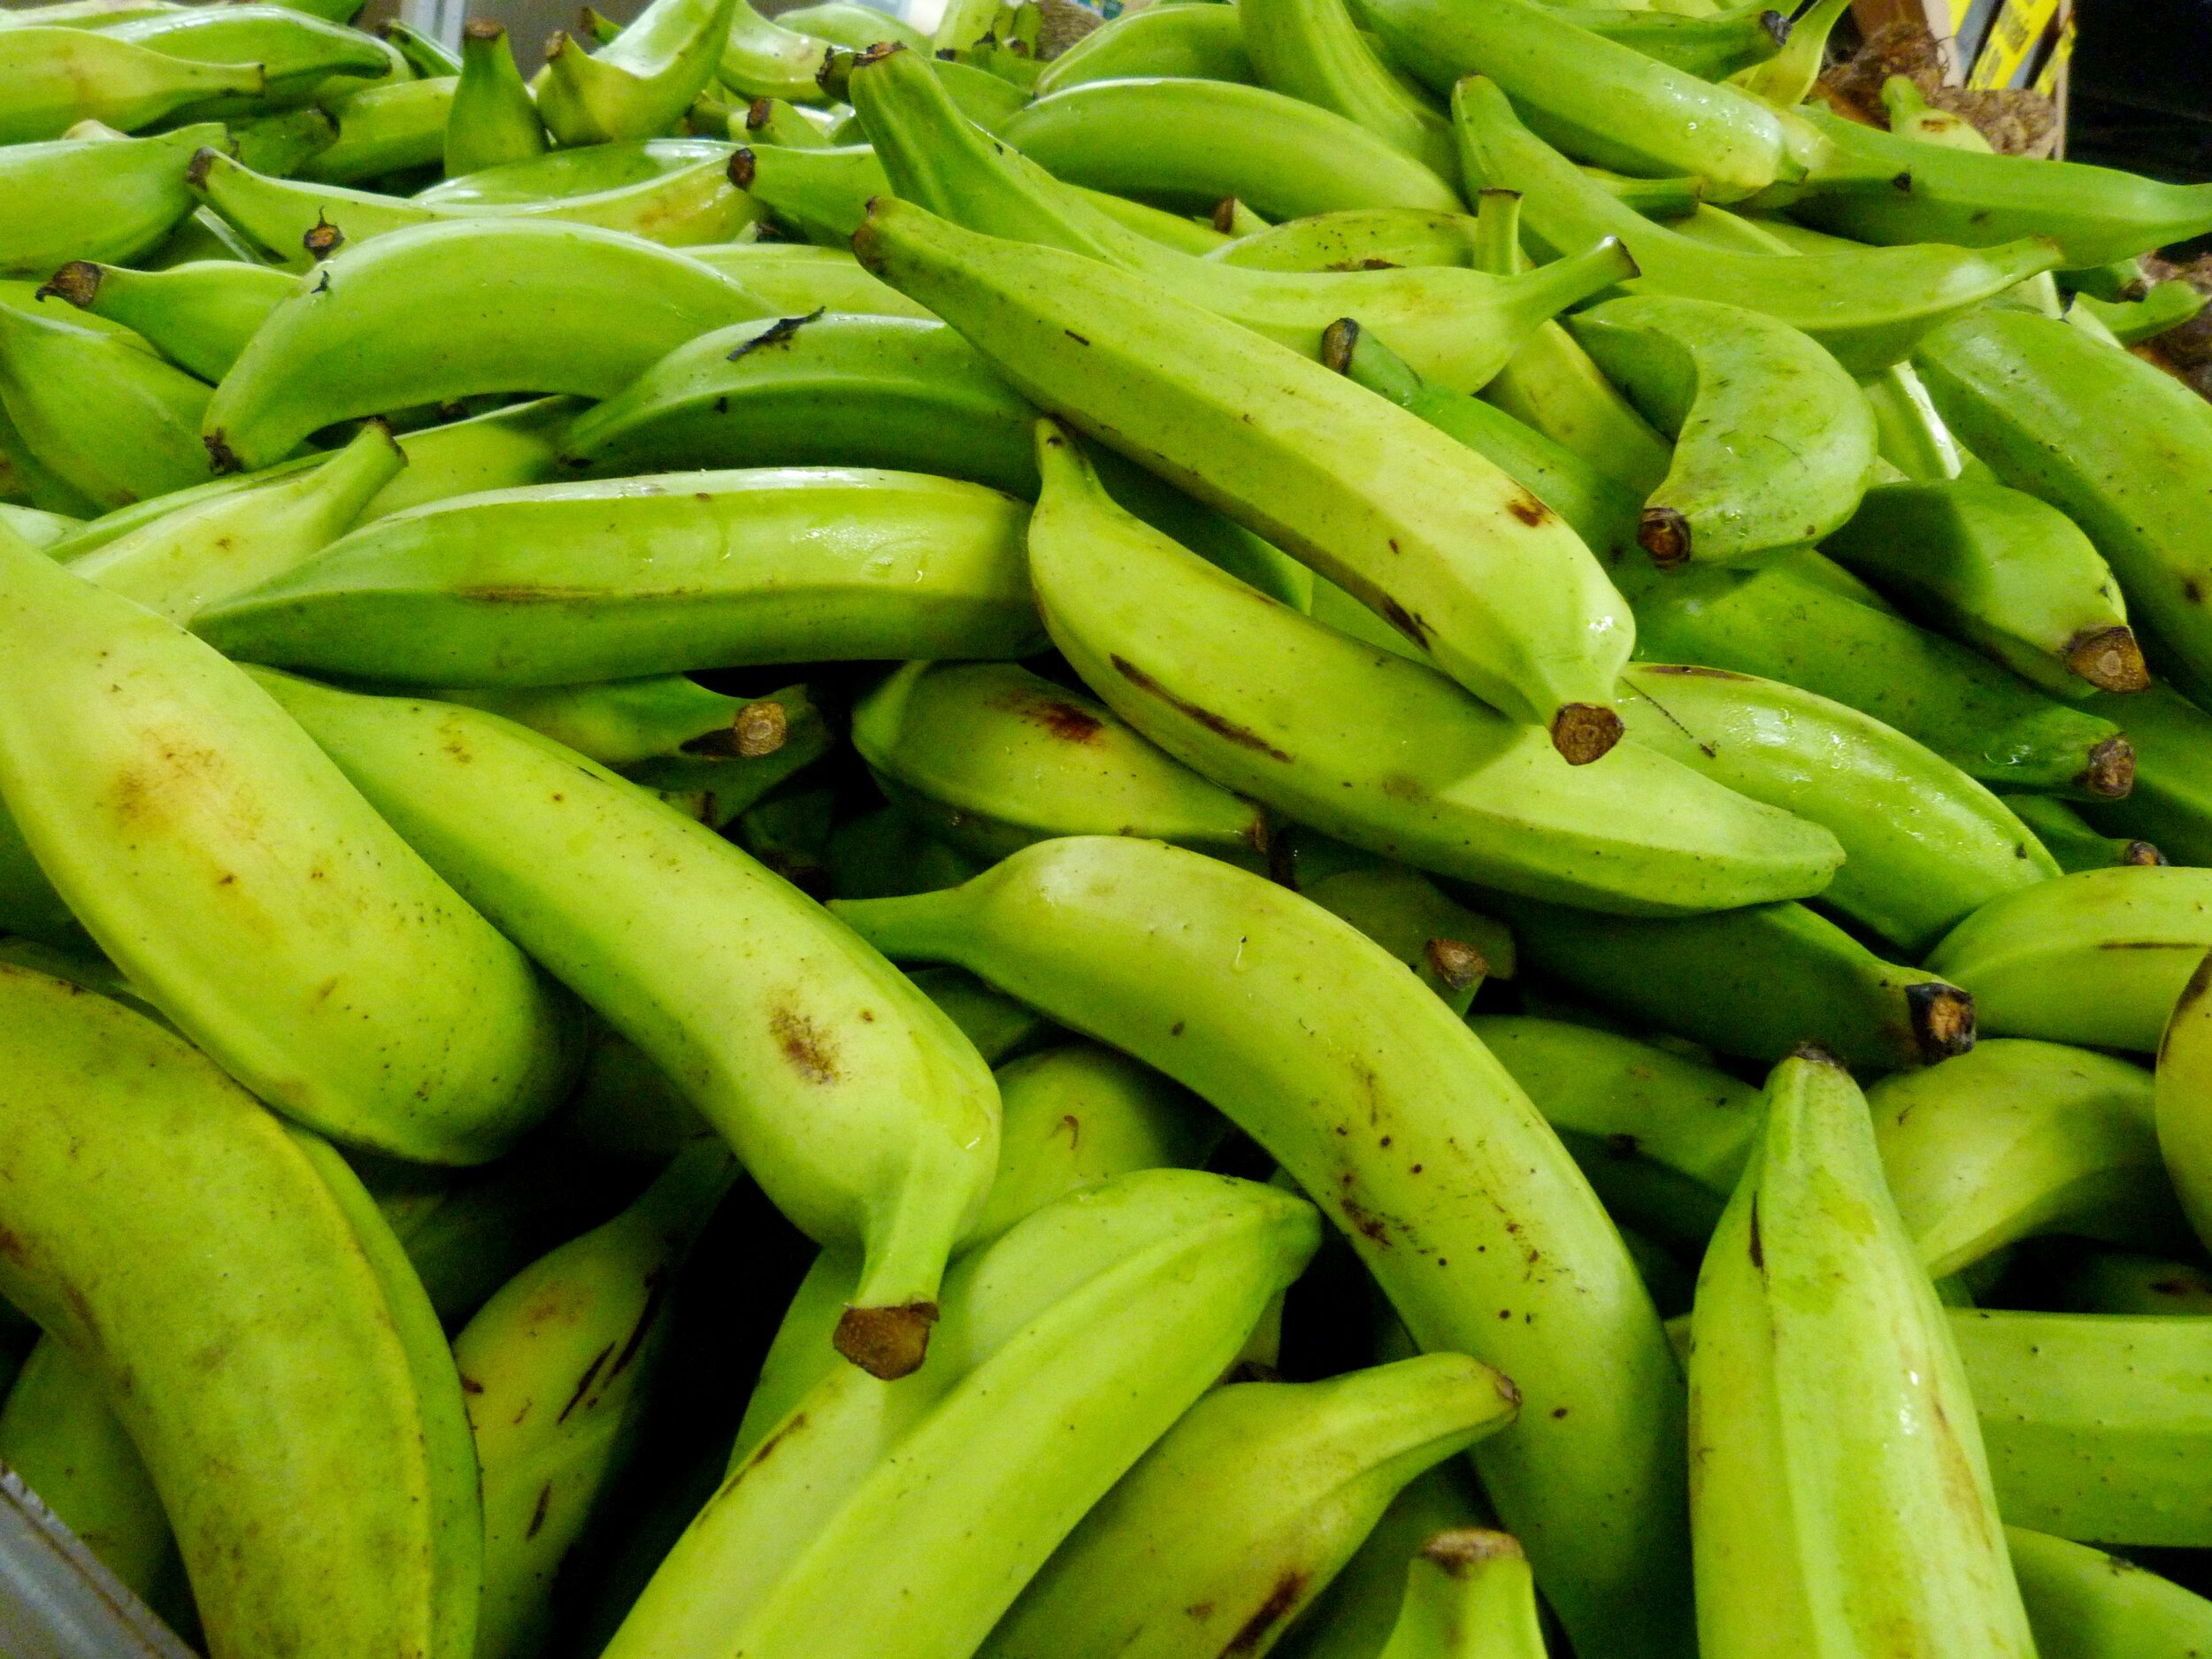 Matoke, green plantain, is the main ingredient in one of Yasmin’s favorite dishes.